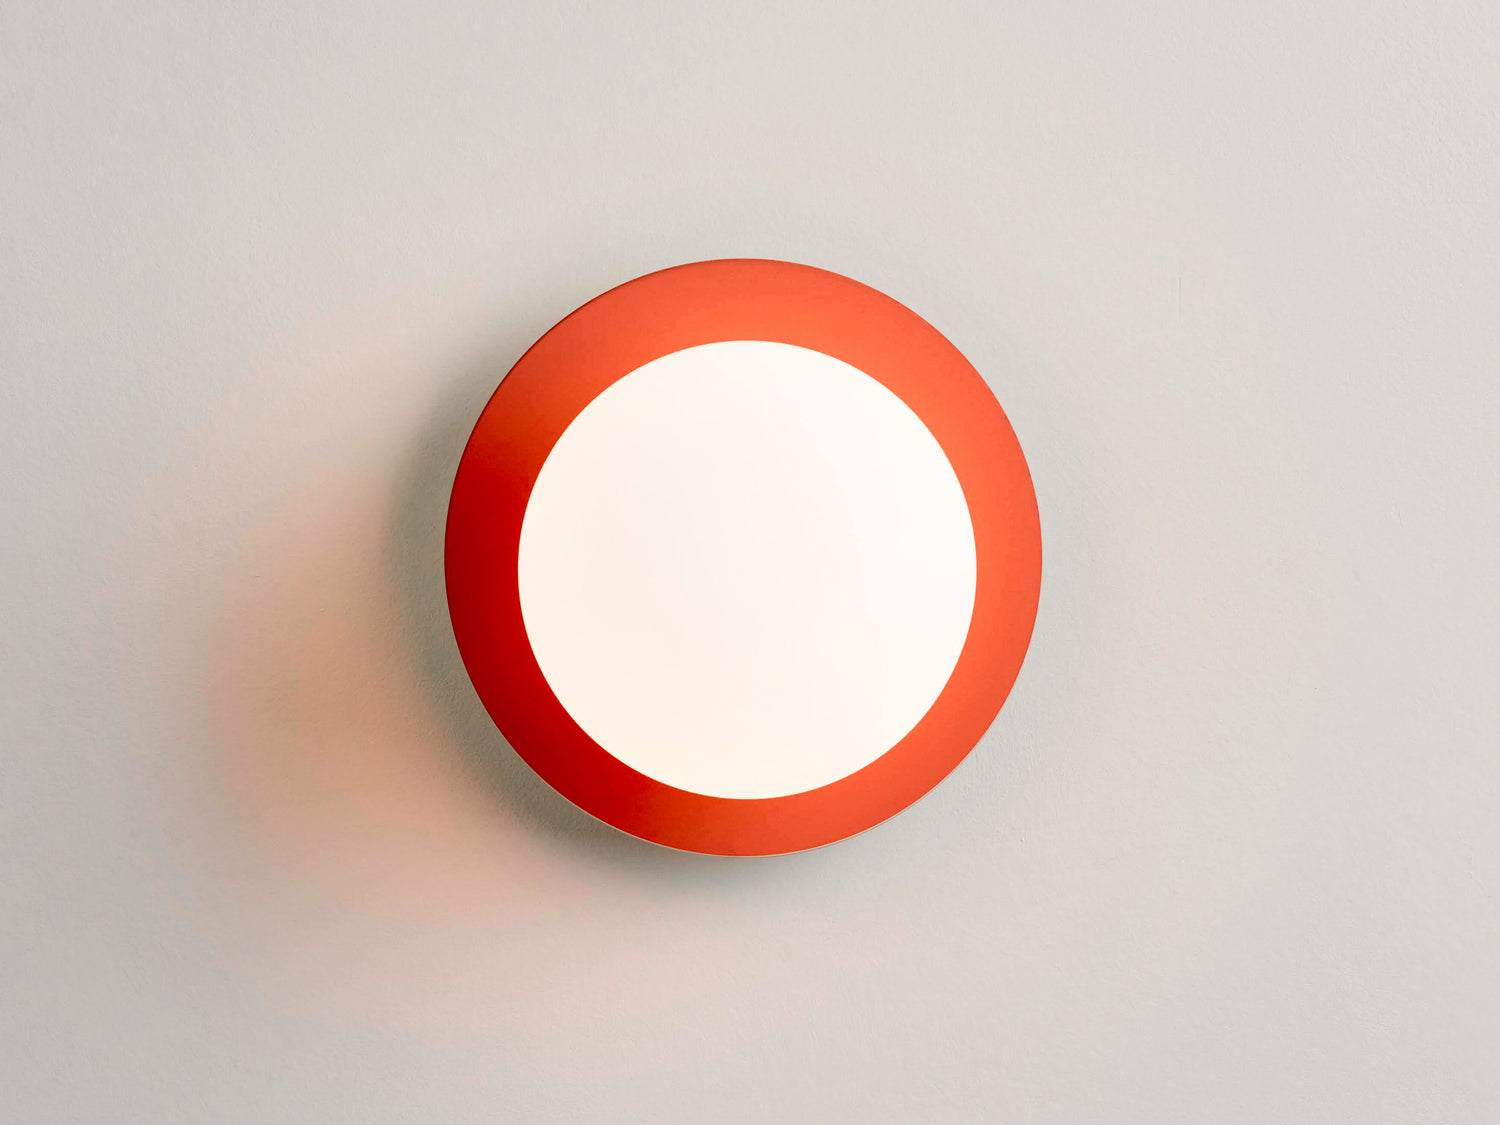 An opal glass shade sits upon an orange metal disk. Light is on. Suitable for bathrooms.